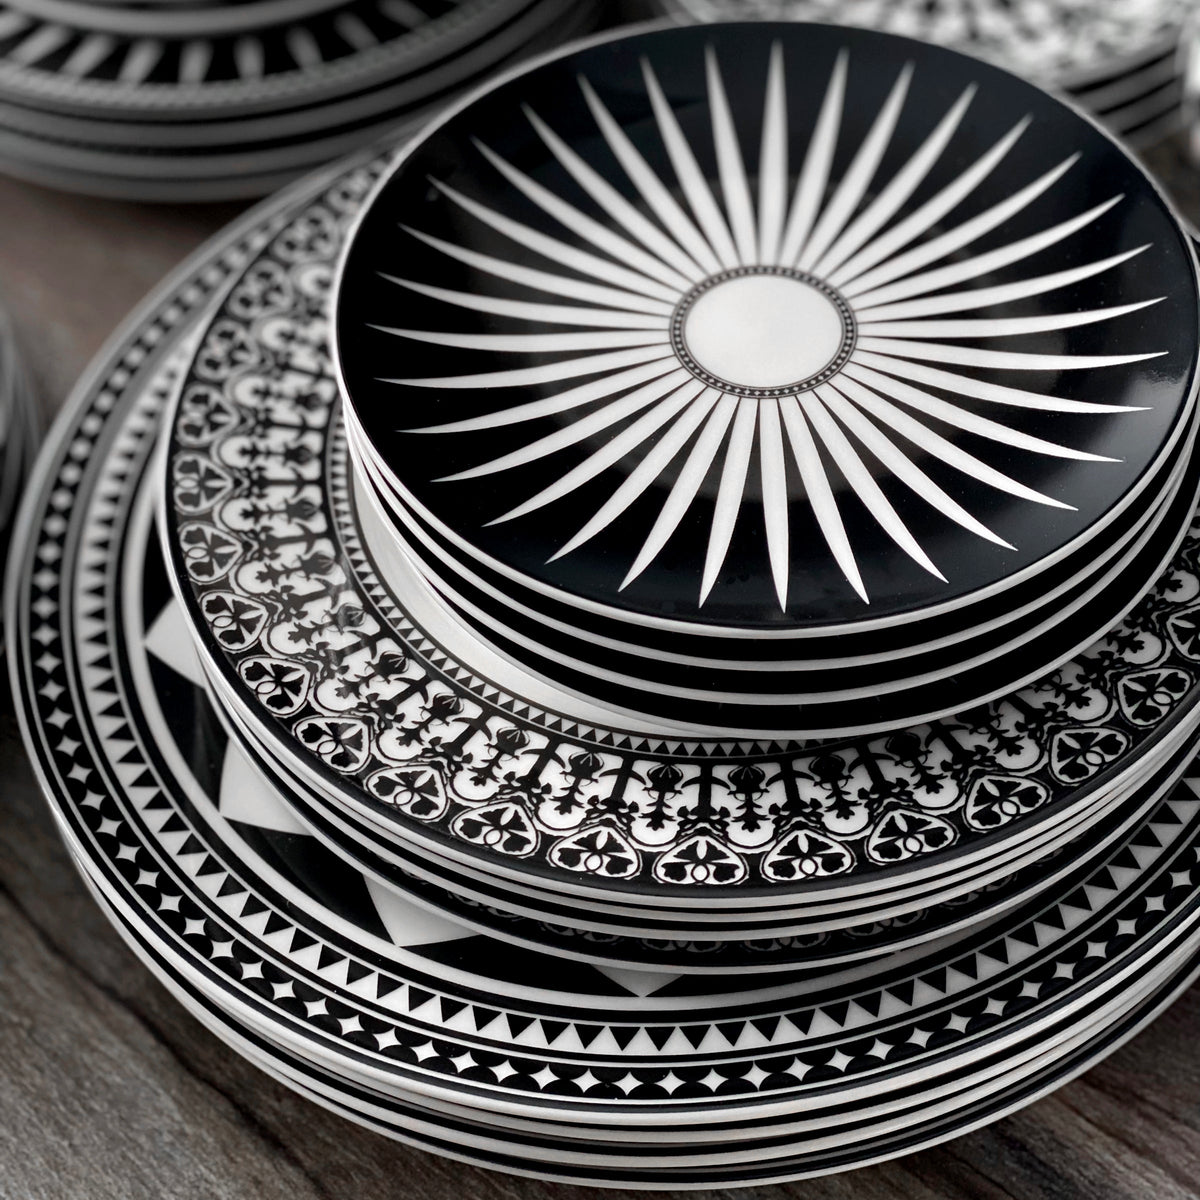 A stunning Geometrics Collection 60 Pc. Set by Caskata Artisanal Home, featuring black and white plates adorned with Moroccan-inspired and graphic patterns, elegantly stacked on top of each other.